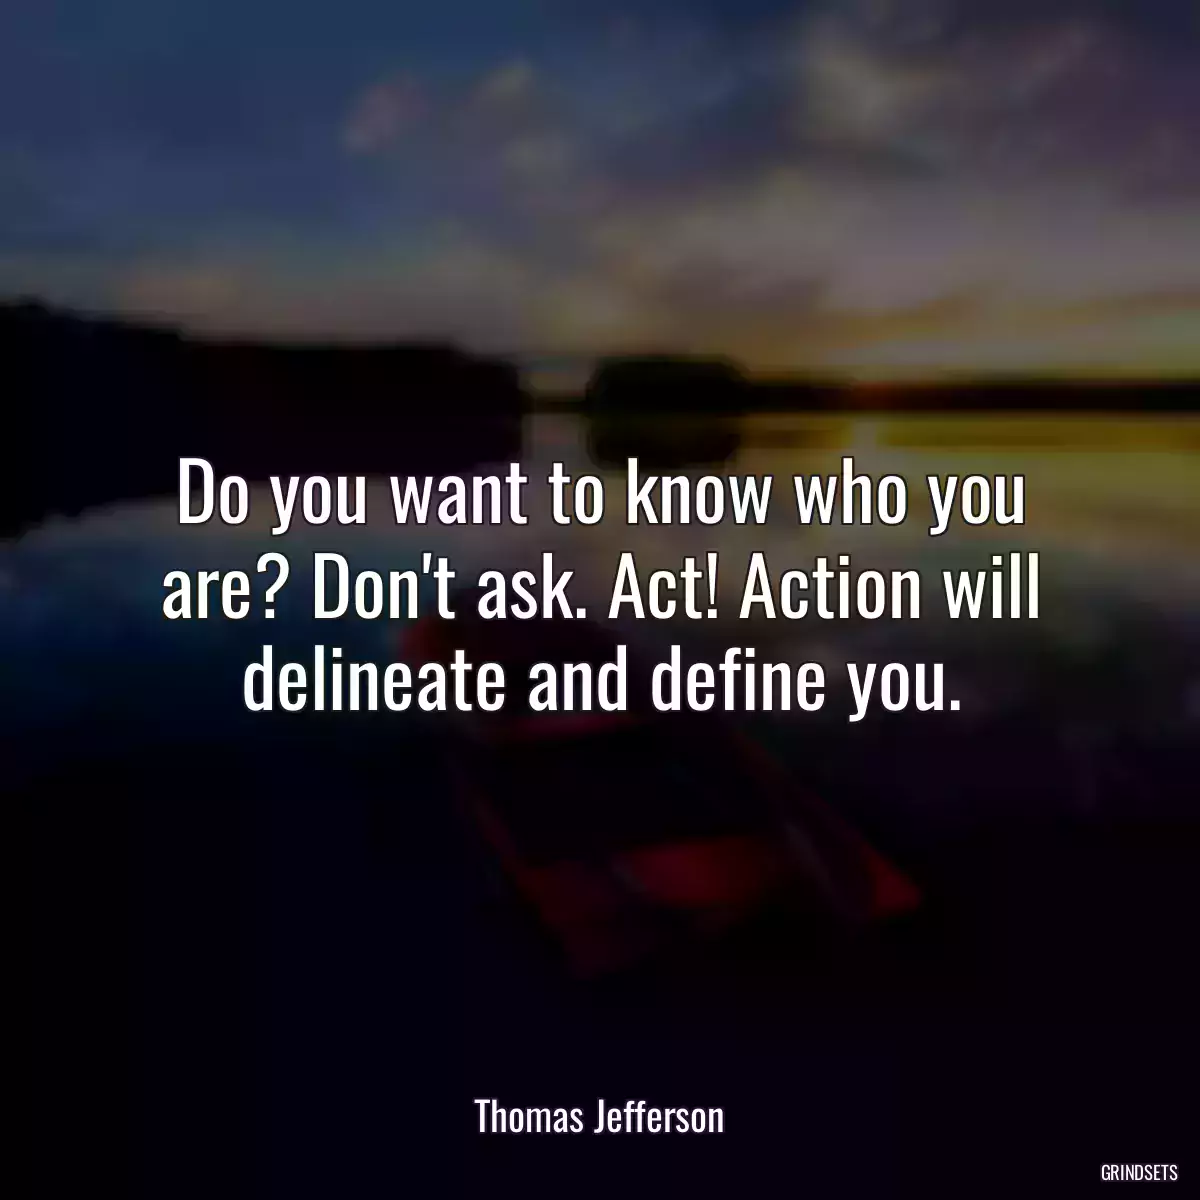 Do you want to know who you are? Don\'t ask. Act! Action will delineate and define you.